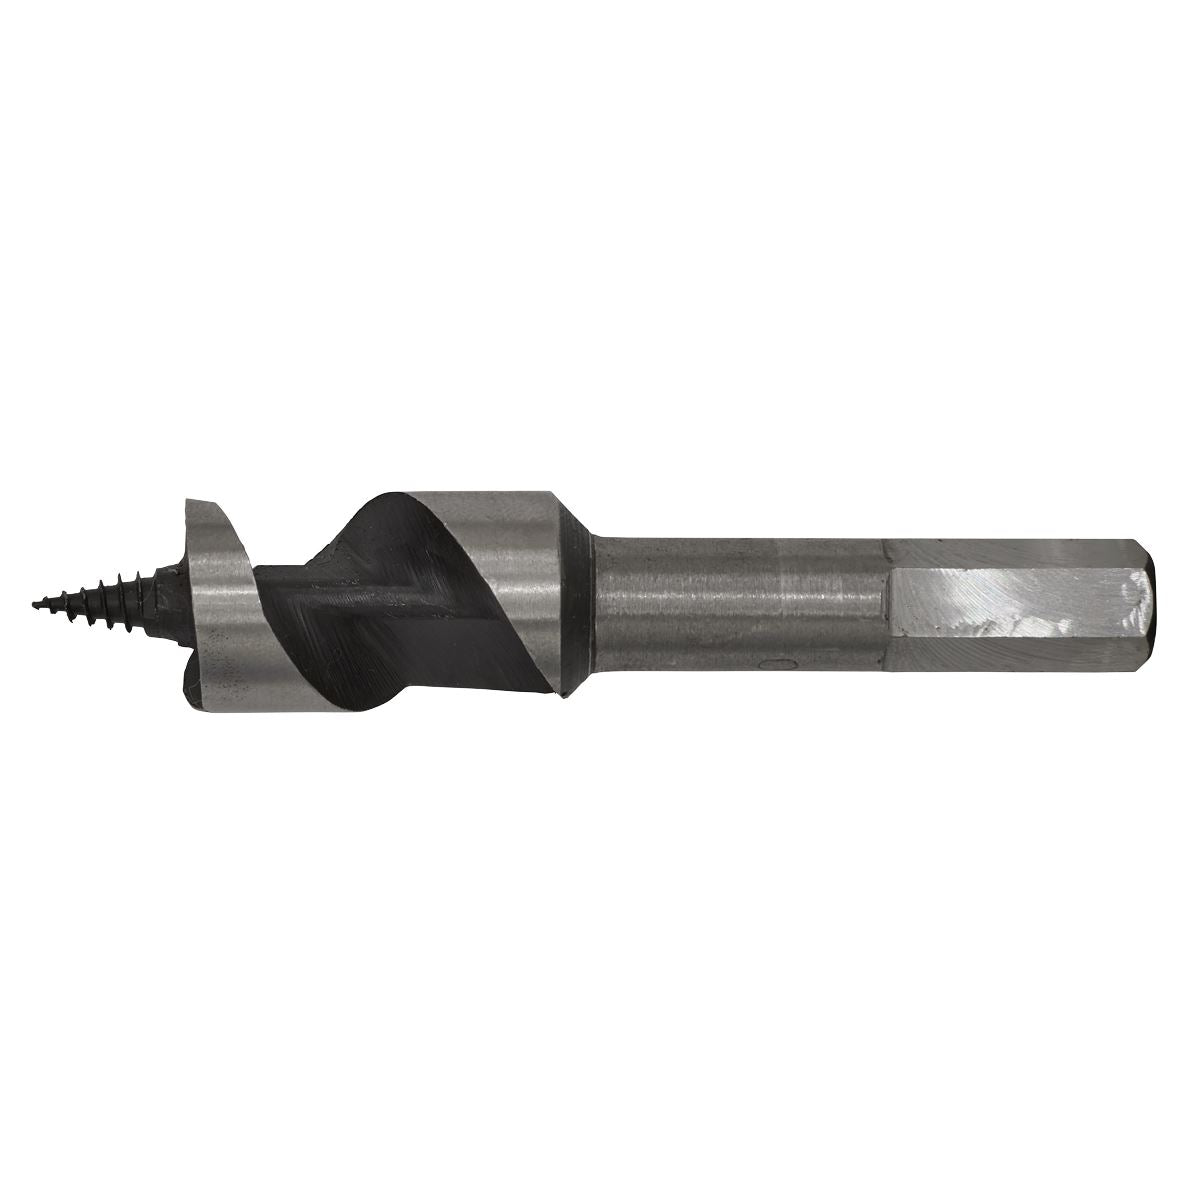 Worksafe by Sealey Auger Wood Drill Bit 20mm x 100mm